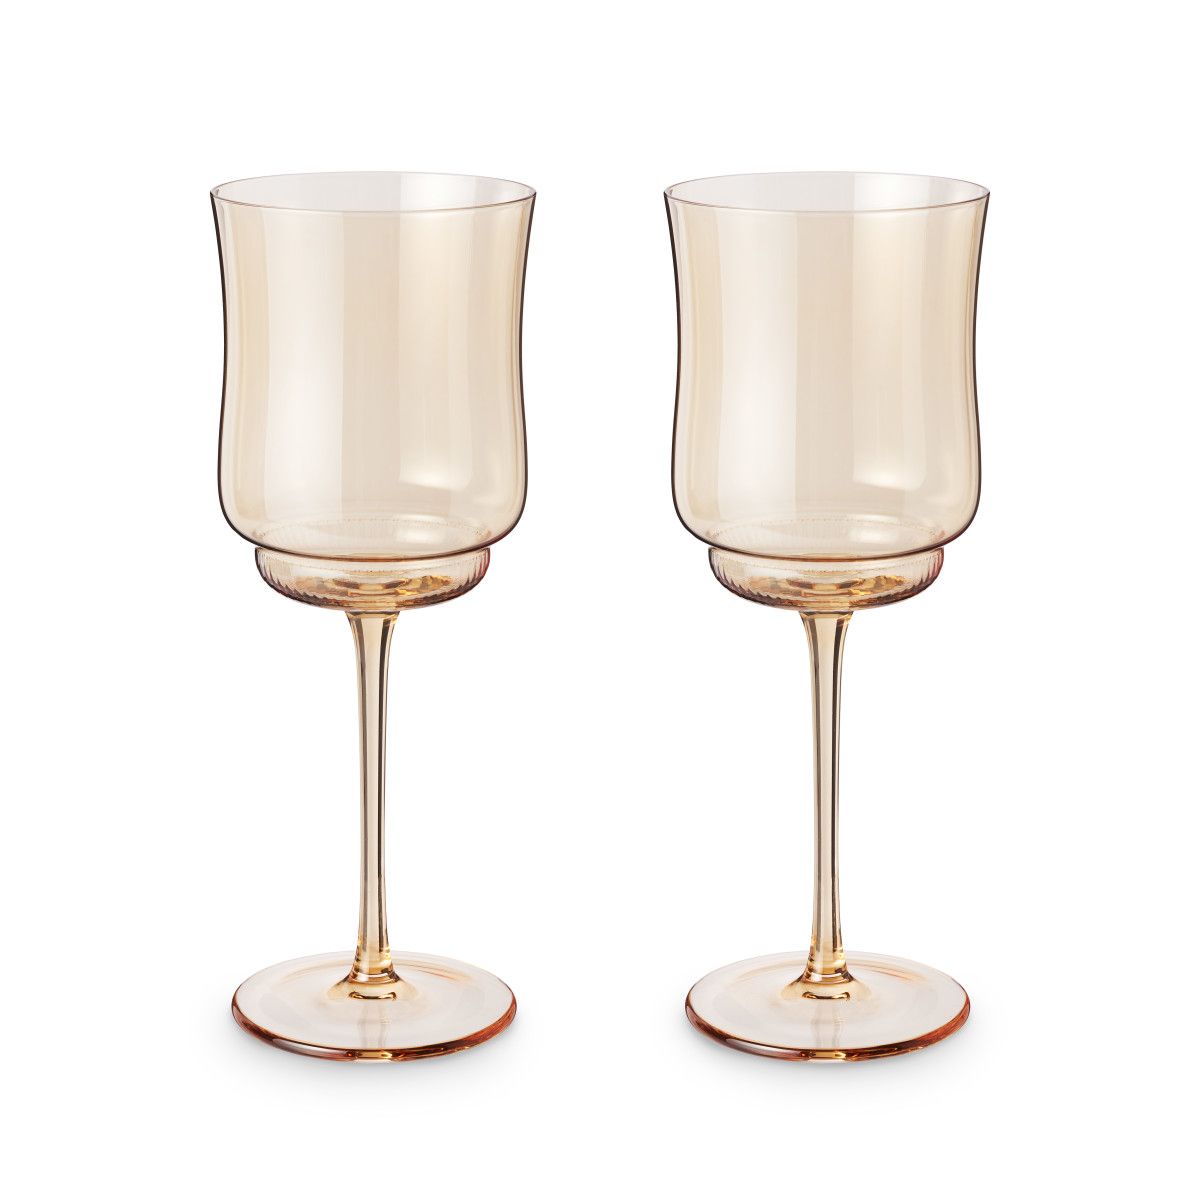 Tulip Stemmed Wine Glass in Amber by Twine Living - Set of 2